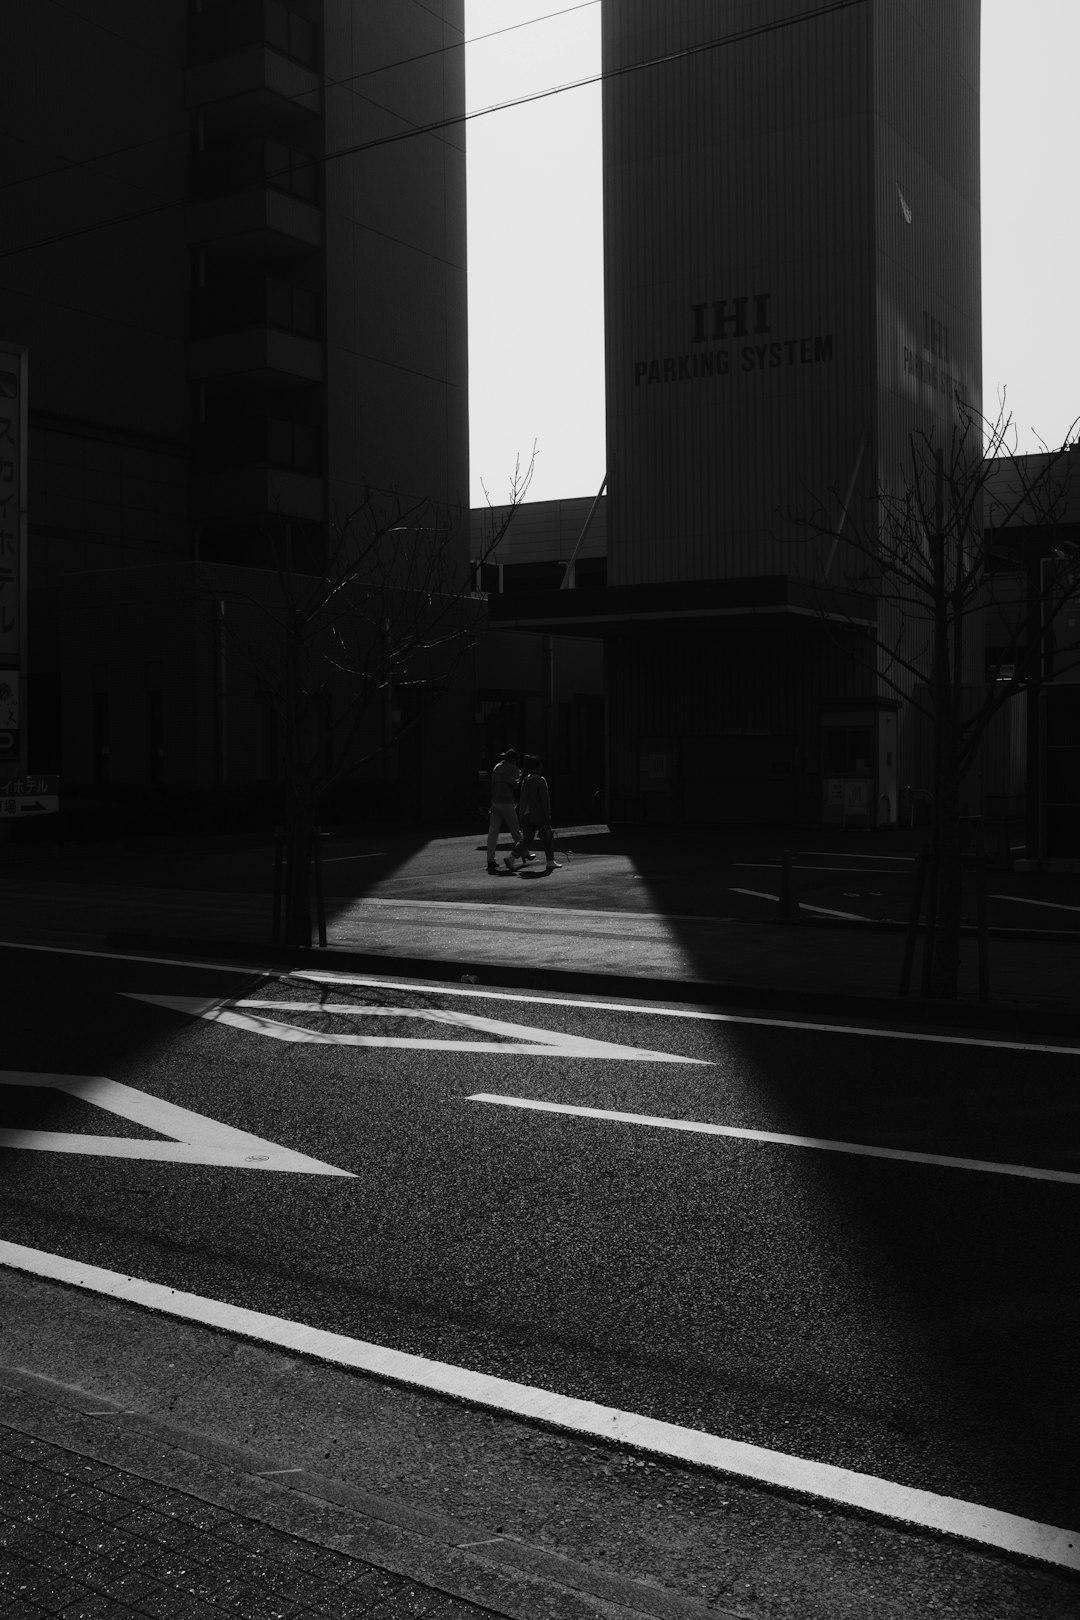 grayscale photo of man riding bicycle on road